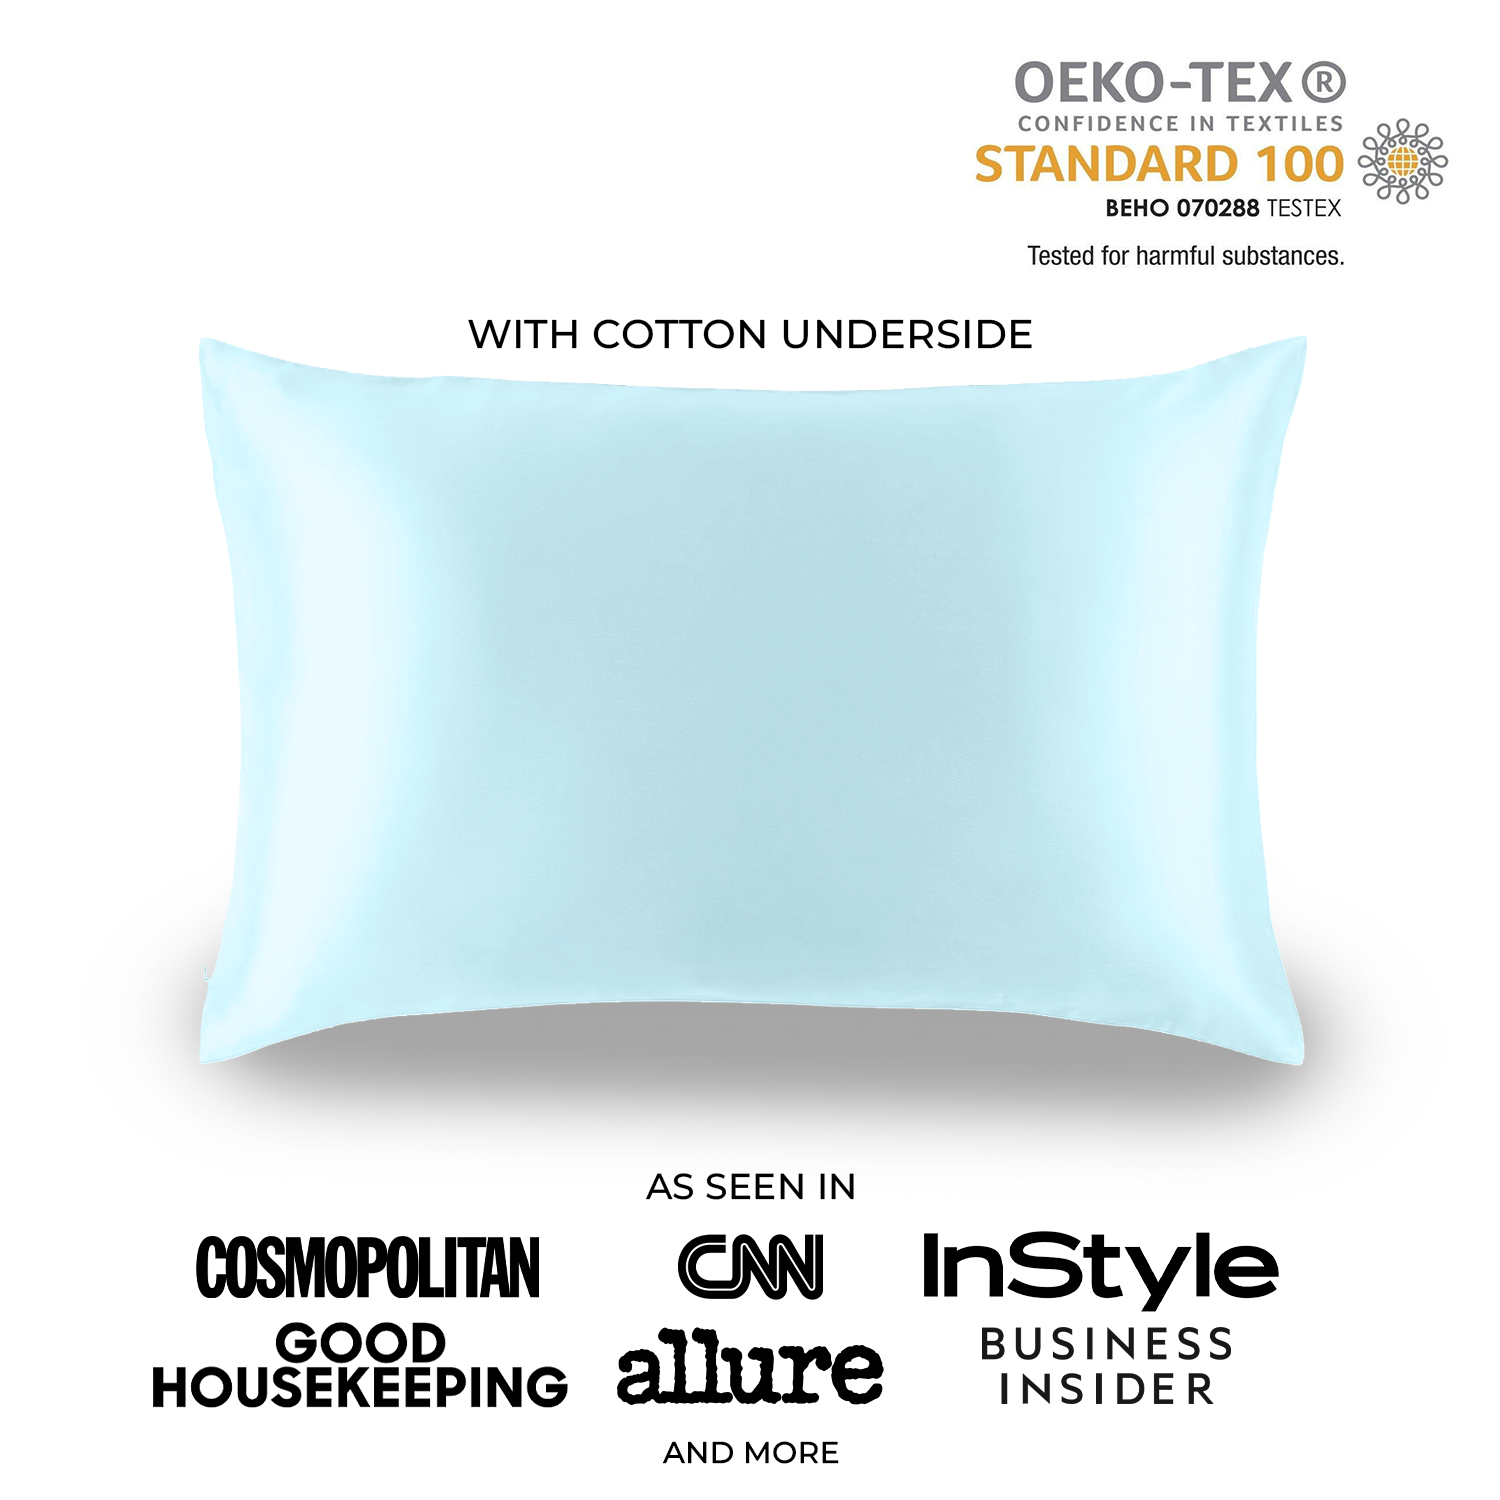 All Silk Products Certified by OEKO